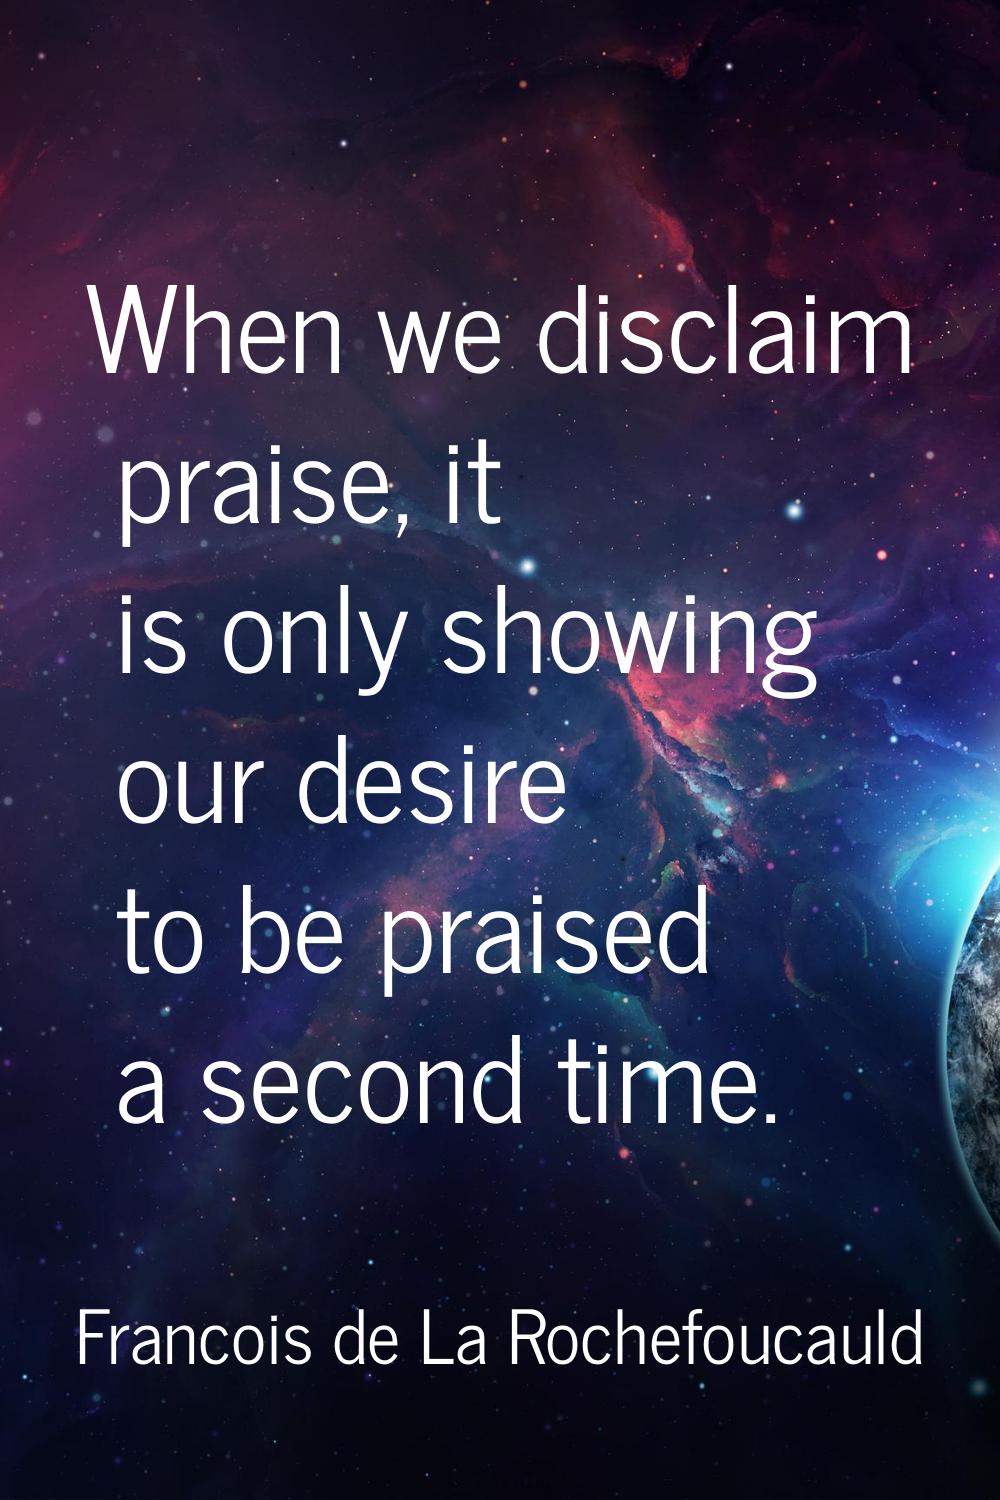 When we disclaim praise, it is only showing our desire to be praised a second time.